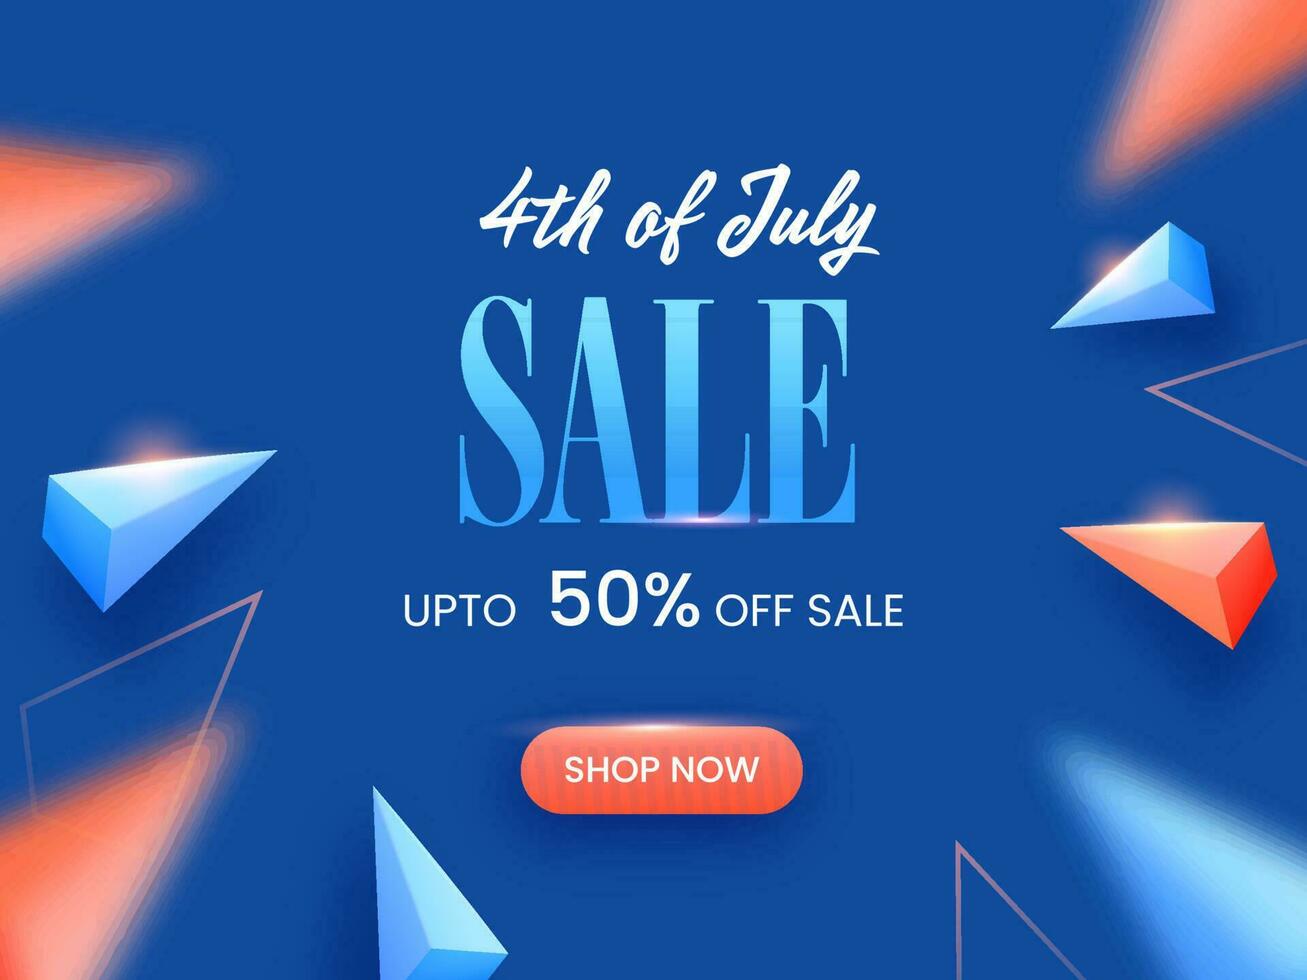 4th Of July Sale Poster Design With Discount Offer And 3D Triangle Elements On Blue Background. vector